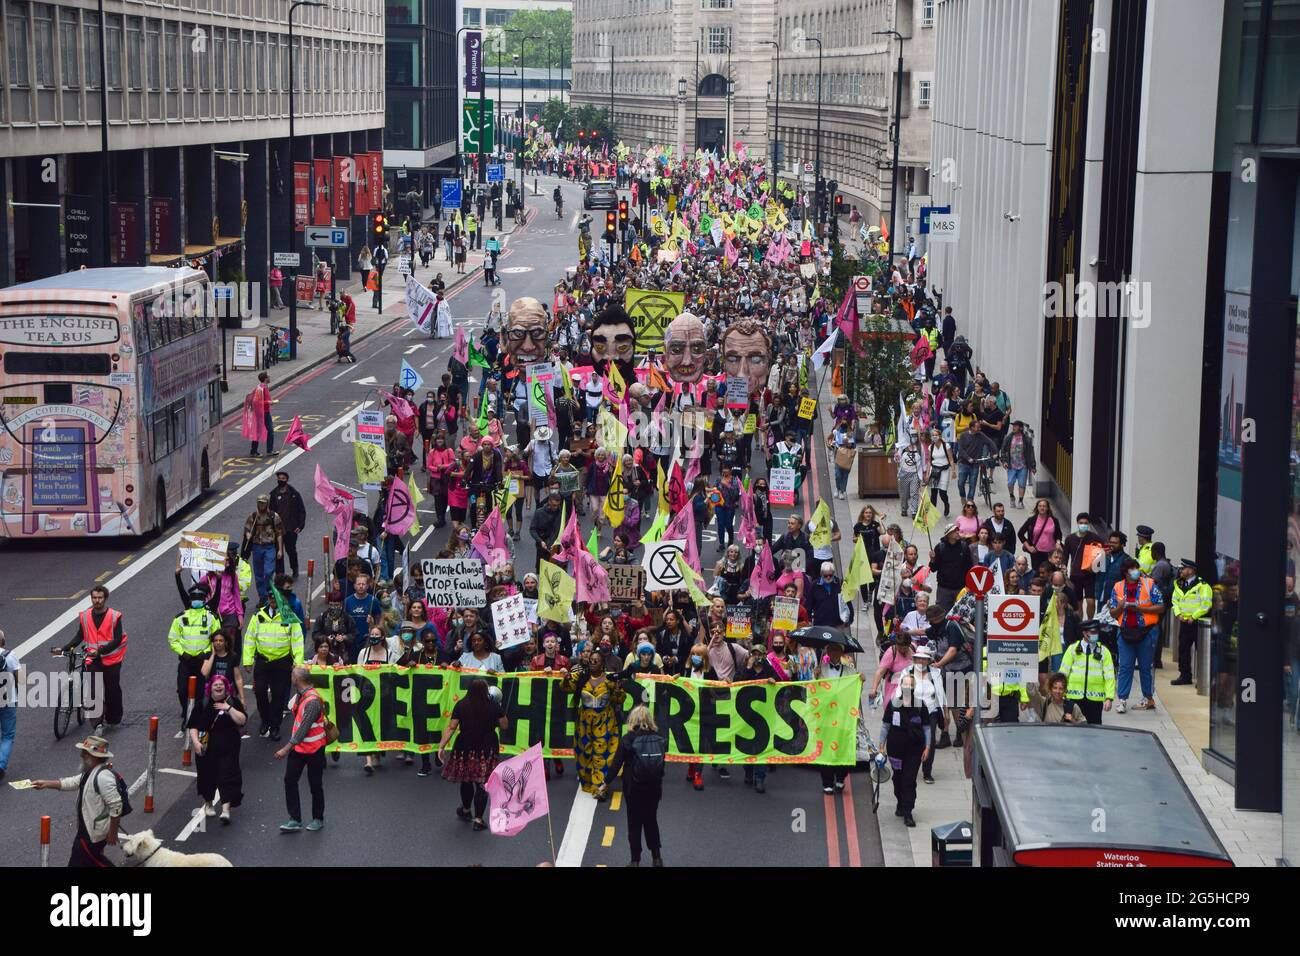 Crowd of demonstrators march through central London during the Free The Press protest.Extinction Rebellion demonstrators marched from Parliament Square to News UK headquarters, owned by Rupert Murdoch, in protest of corruption, and the inaccurate and insufficient coverage of the climate and environmental crisis by several major UK newspapers owned by billionaires. (Photo by Vuk Valcic / SOPA Images/Sipa USA) Stock Photo